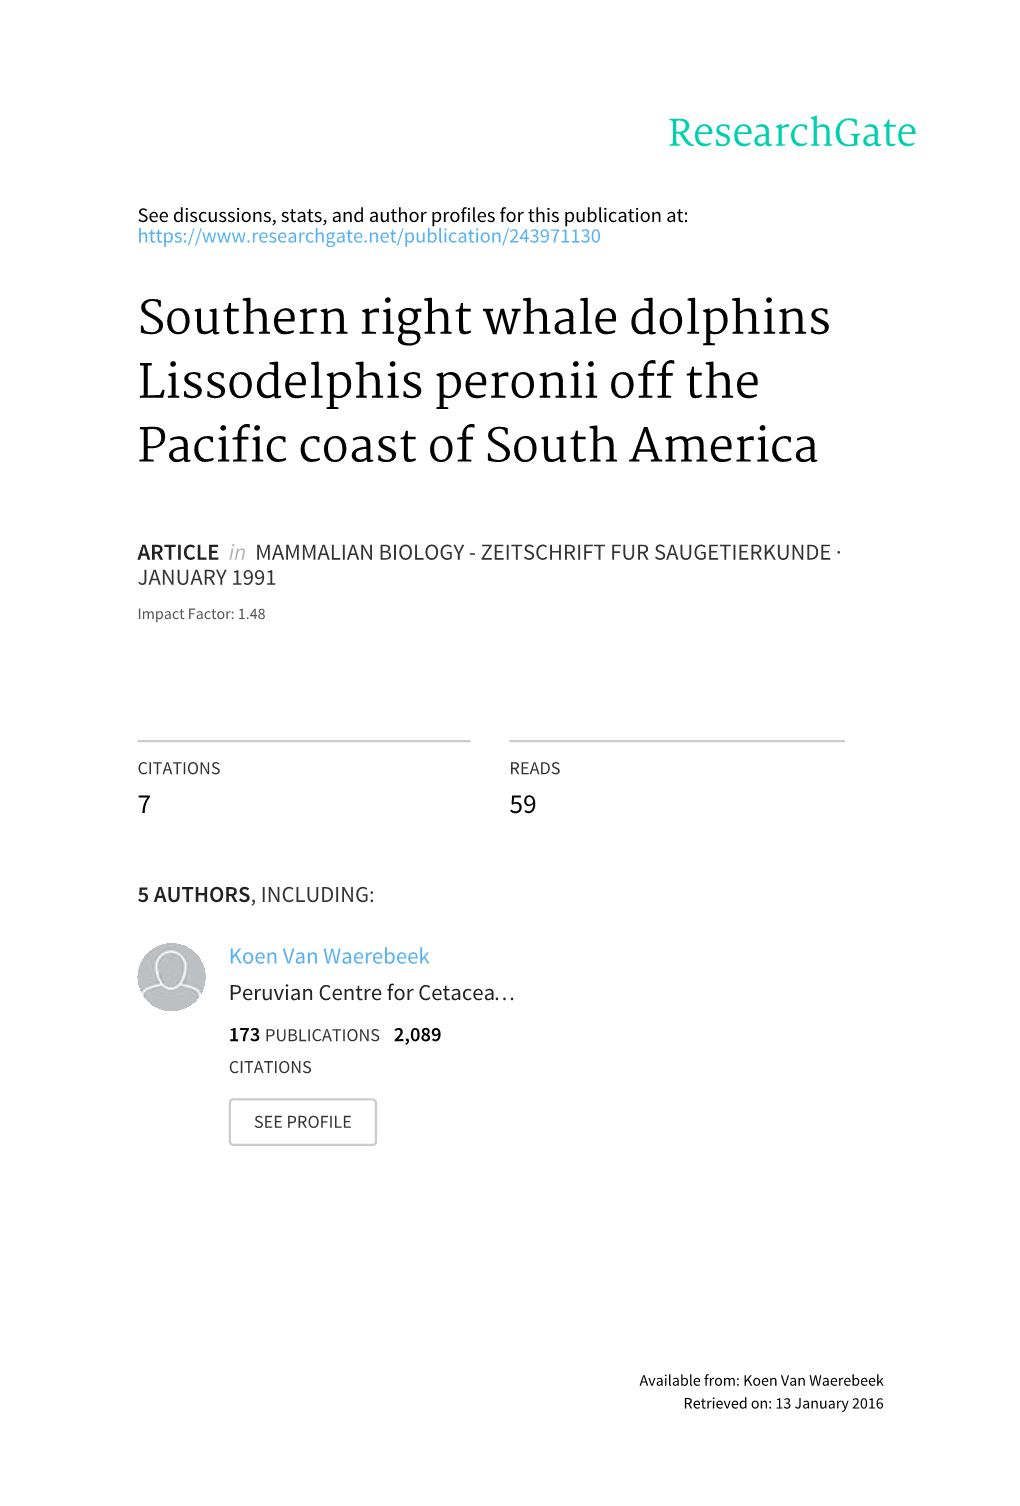 Southern Right Whale Dolphins Lissodelphis Peronii Off the Pacific Coast of South America